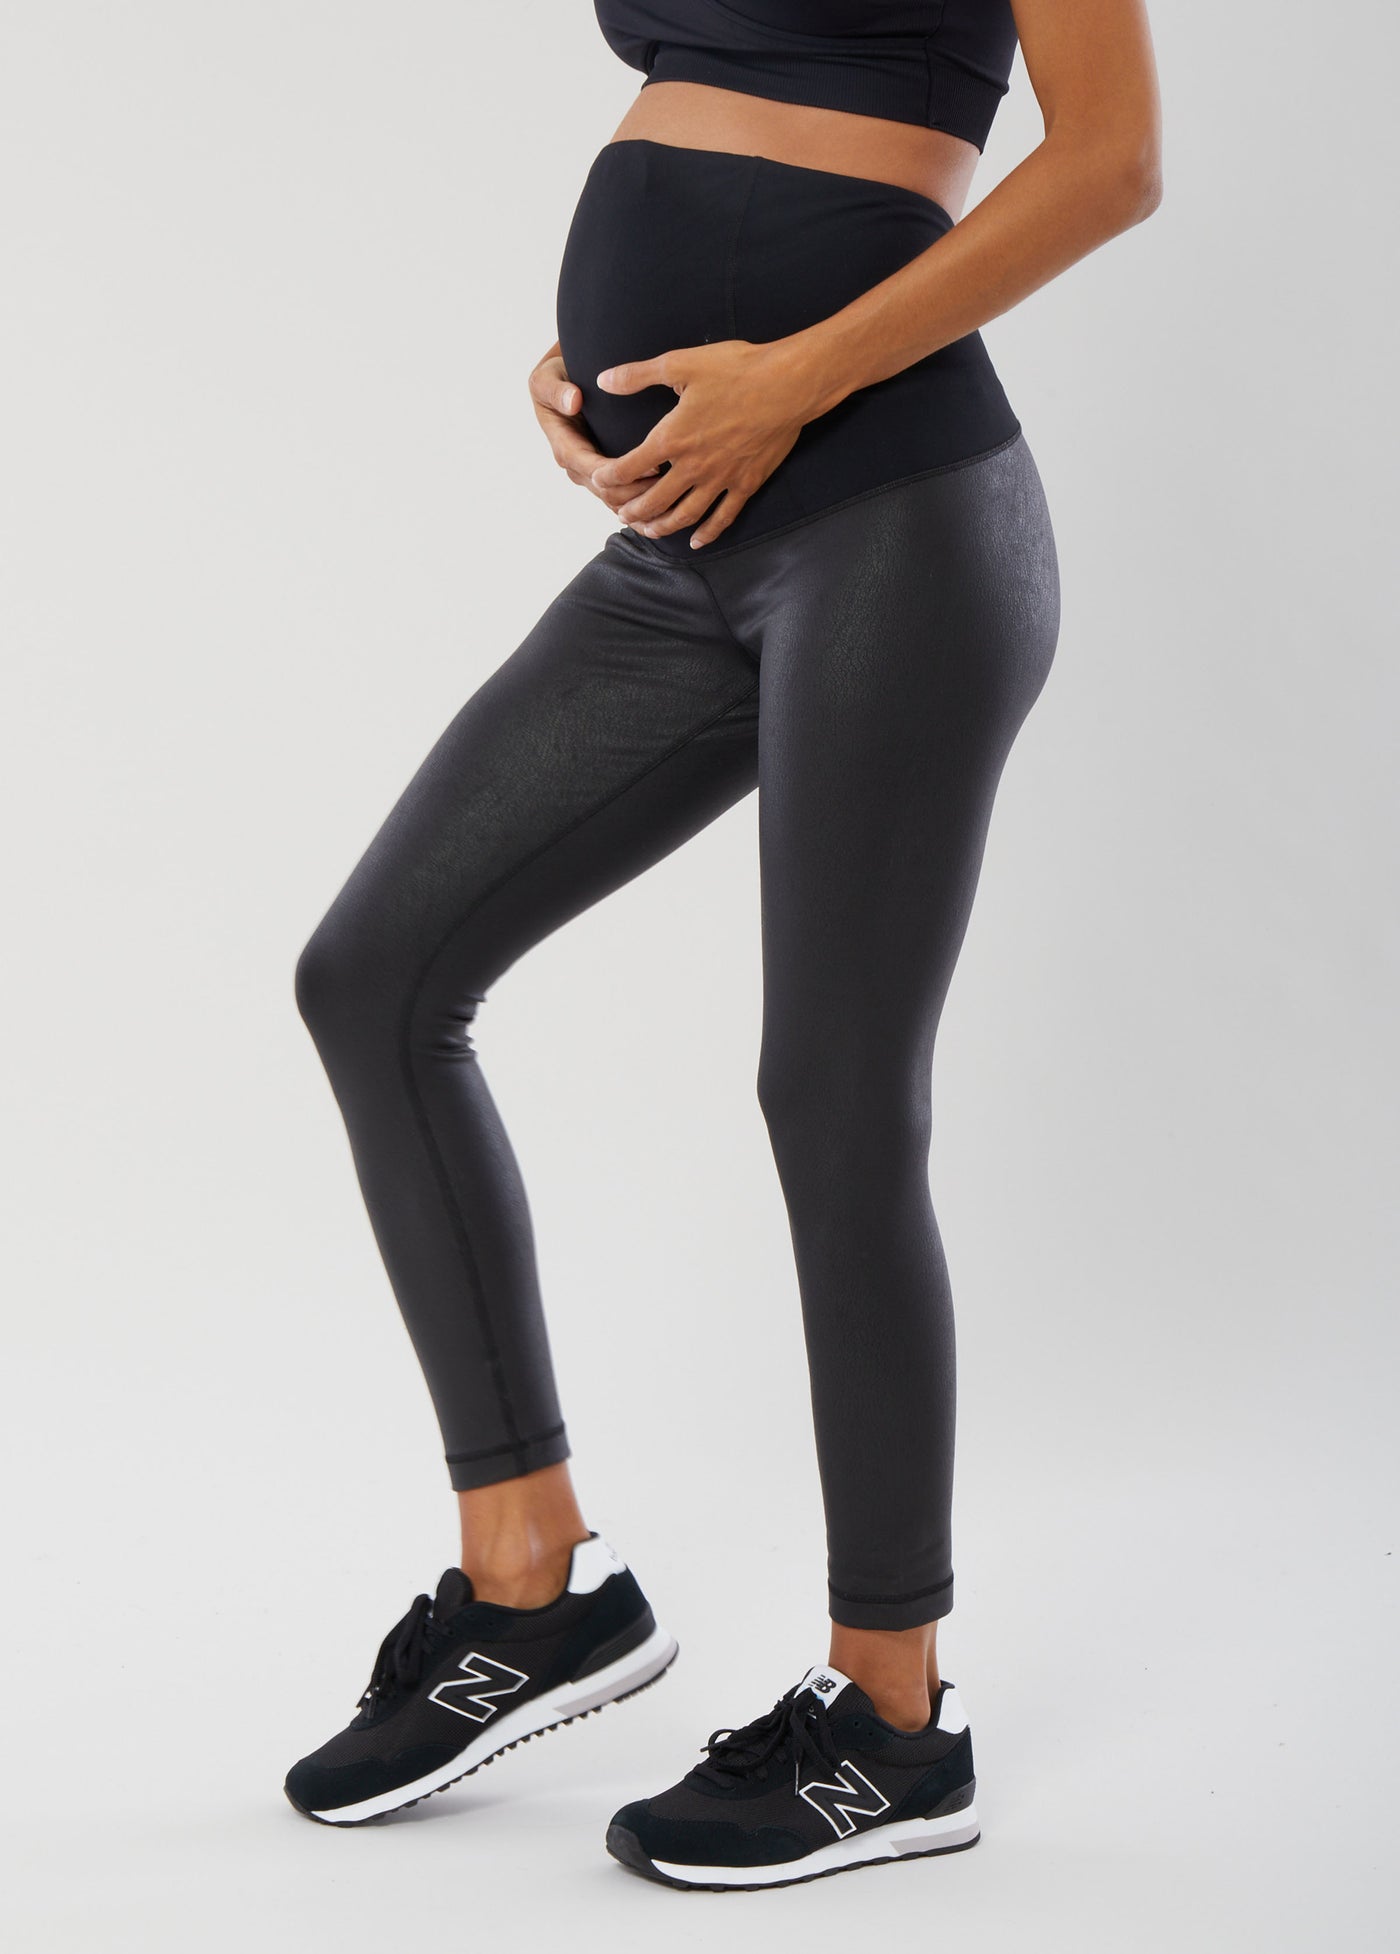 Maternity Ingrid & Isabel Faux Leather Legging with Crossover Panel Black M